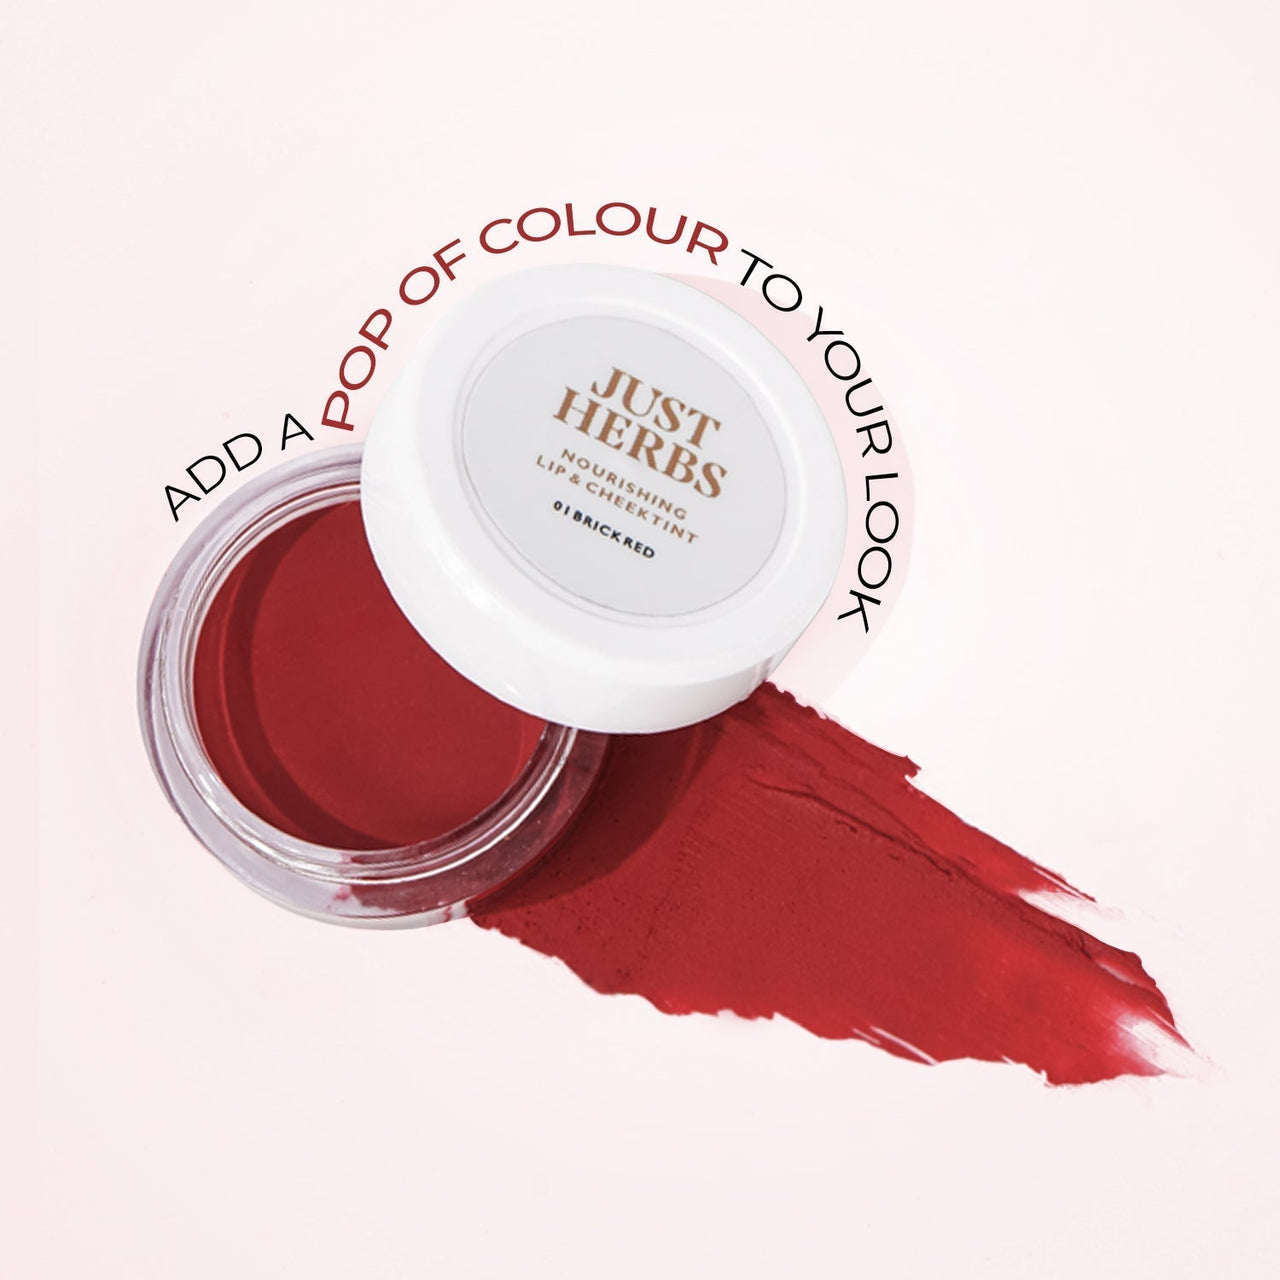 Nourishing Lip and Cheek Tint (Pack of 2): Pale Pink and Brick Red